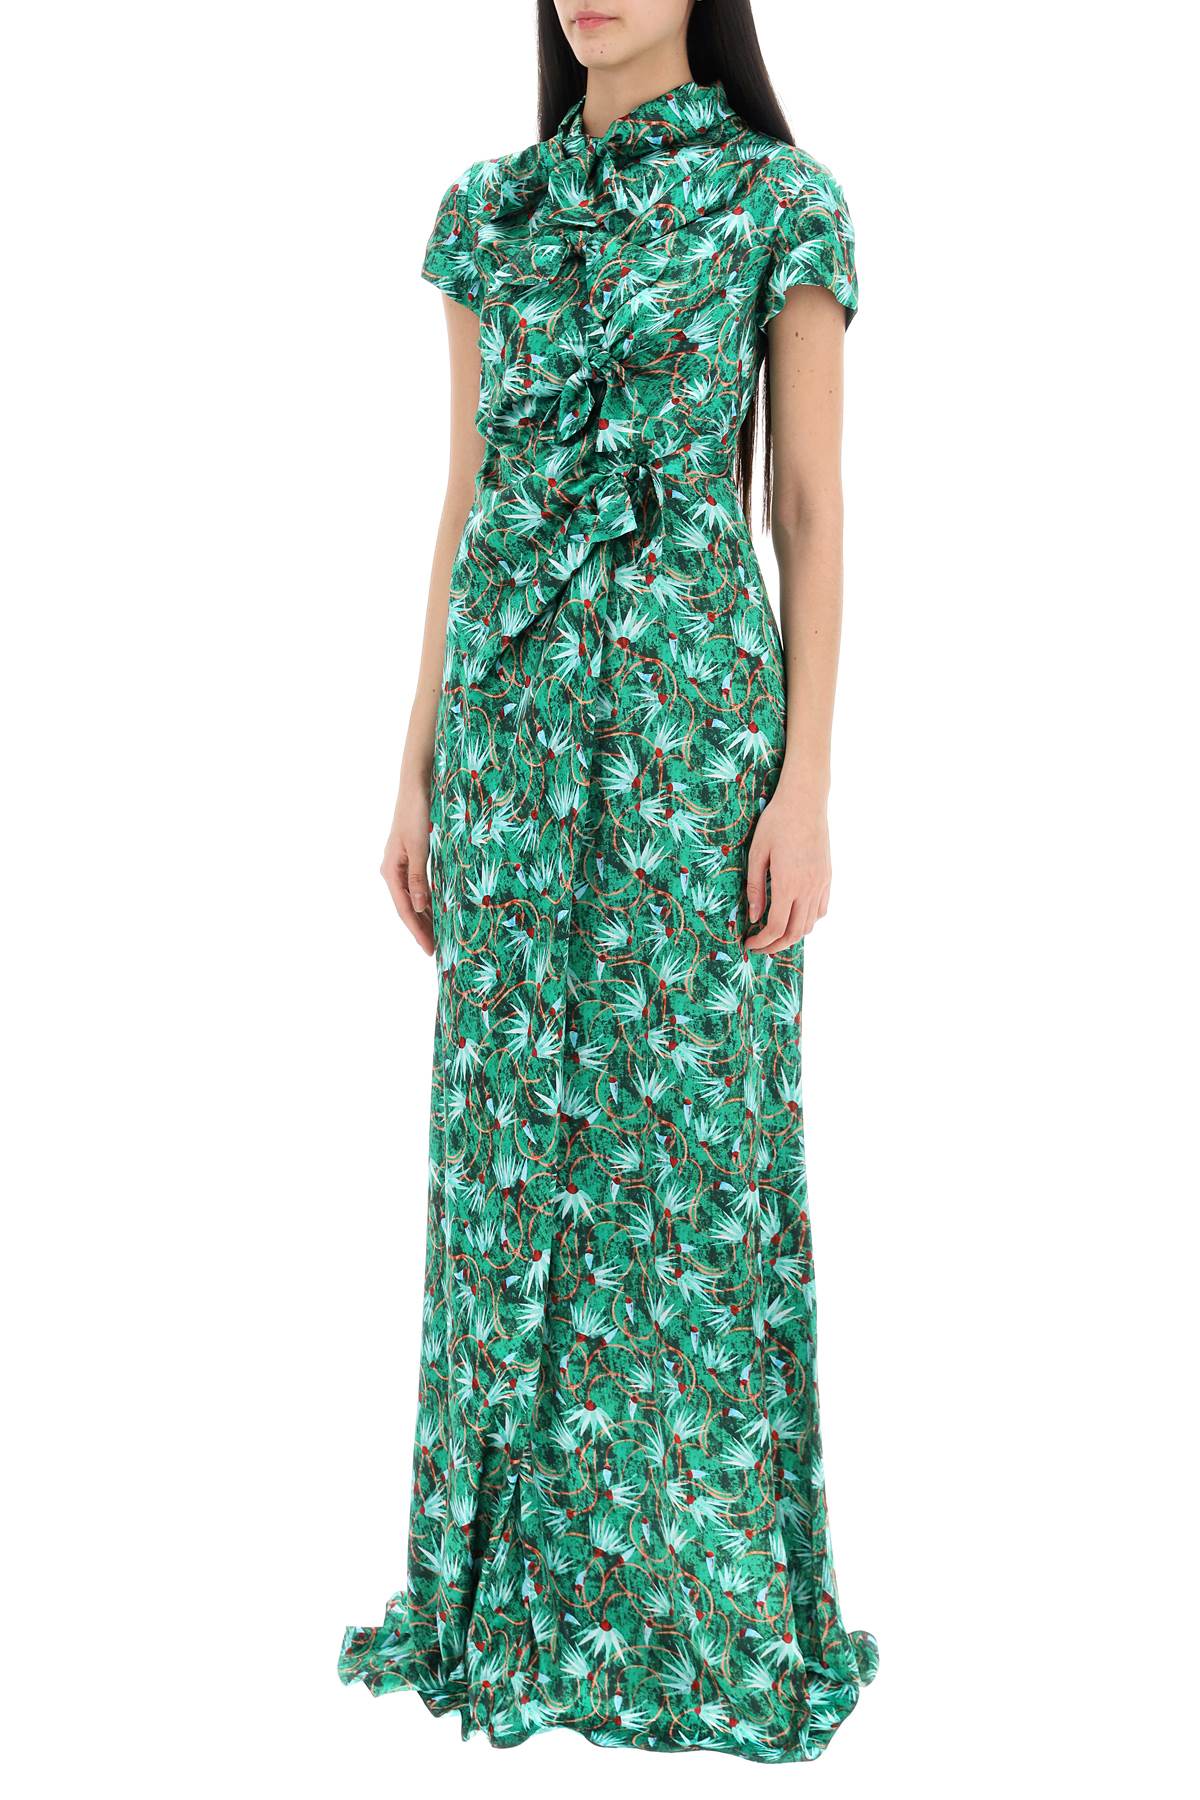 Saloni maxi floral dress kelly with bows-3